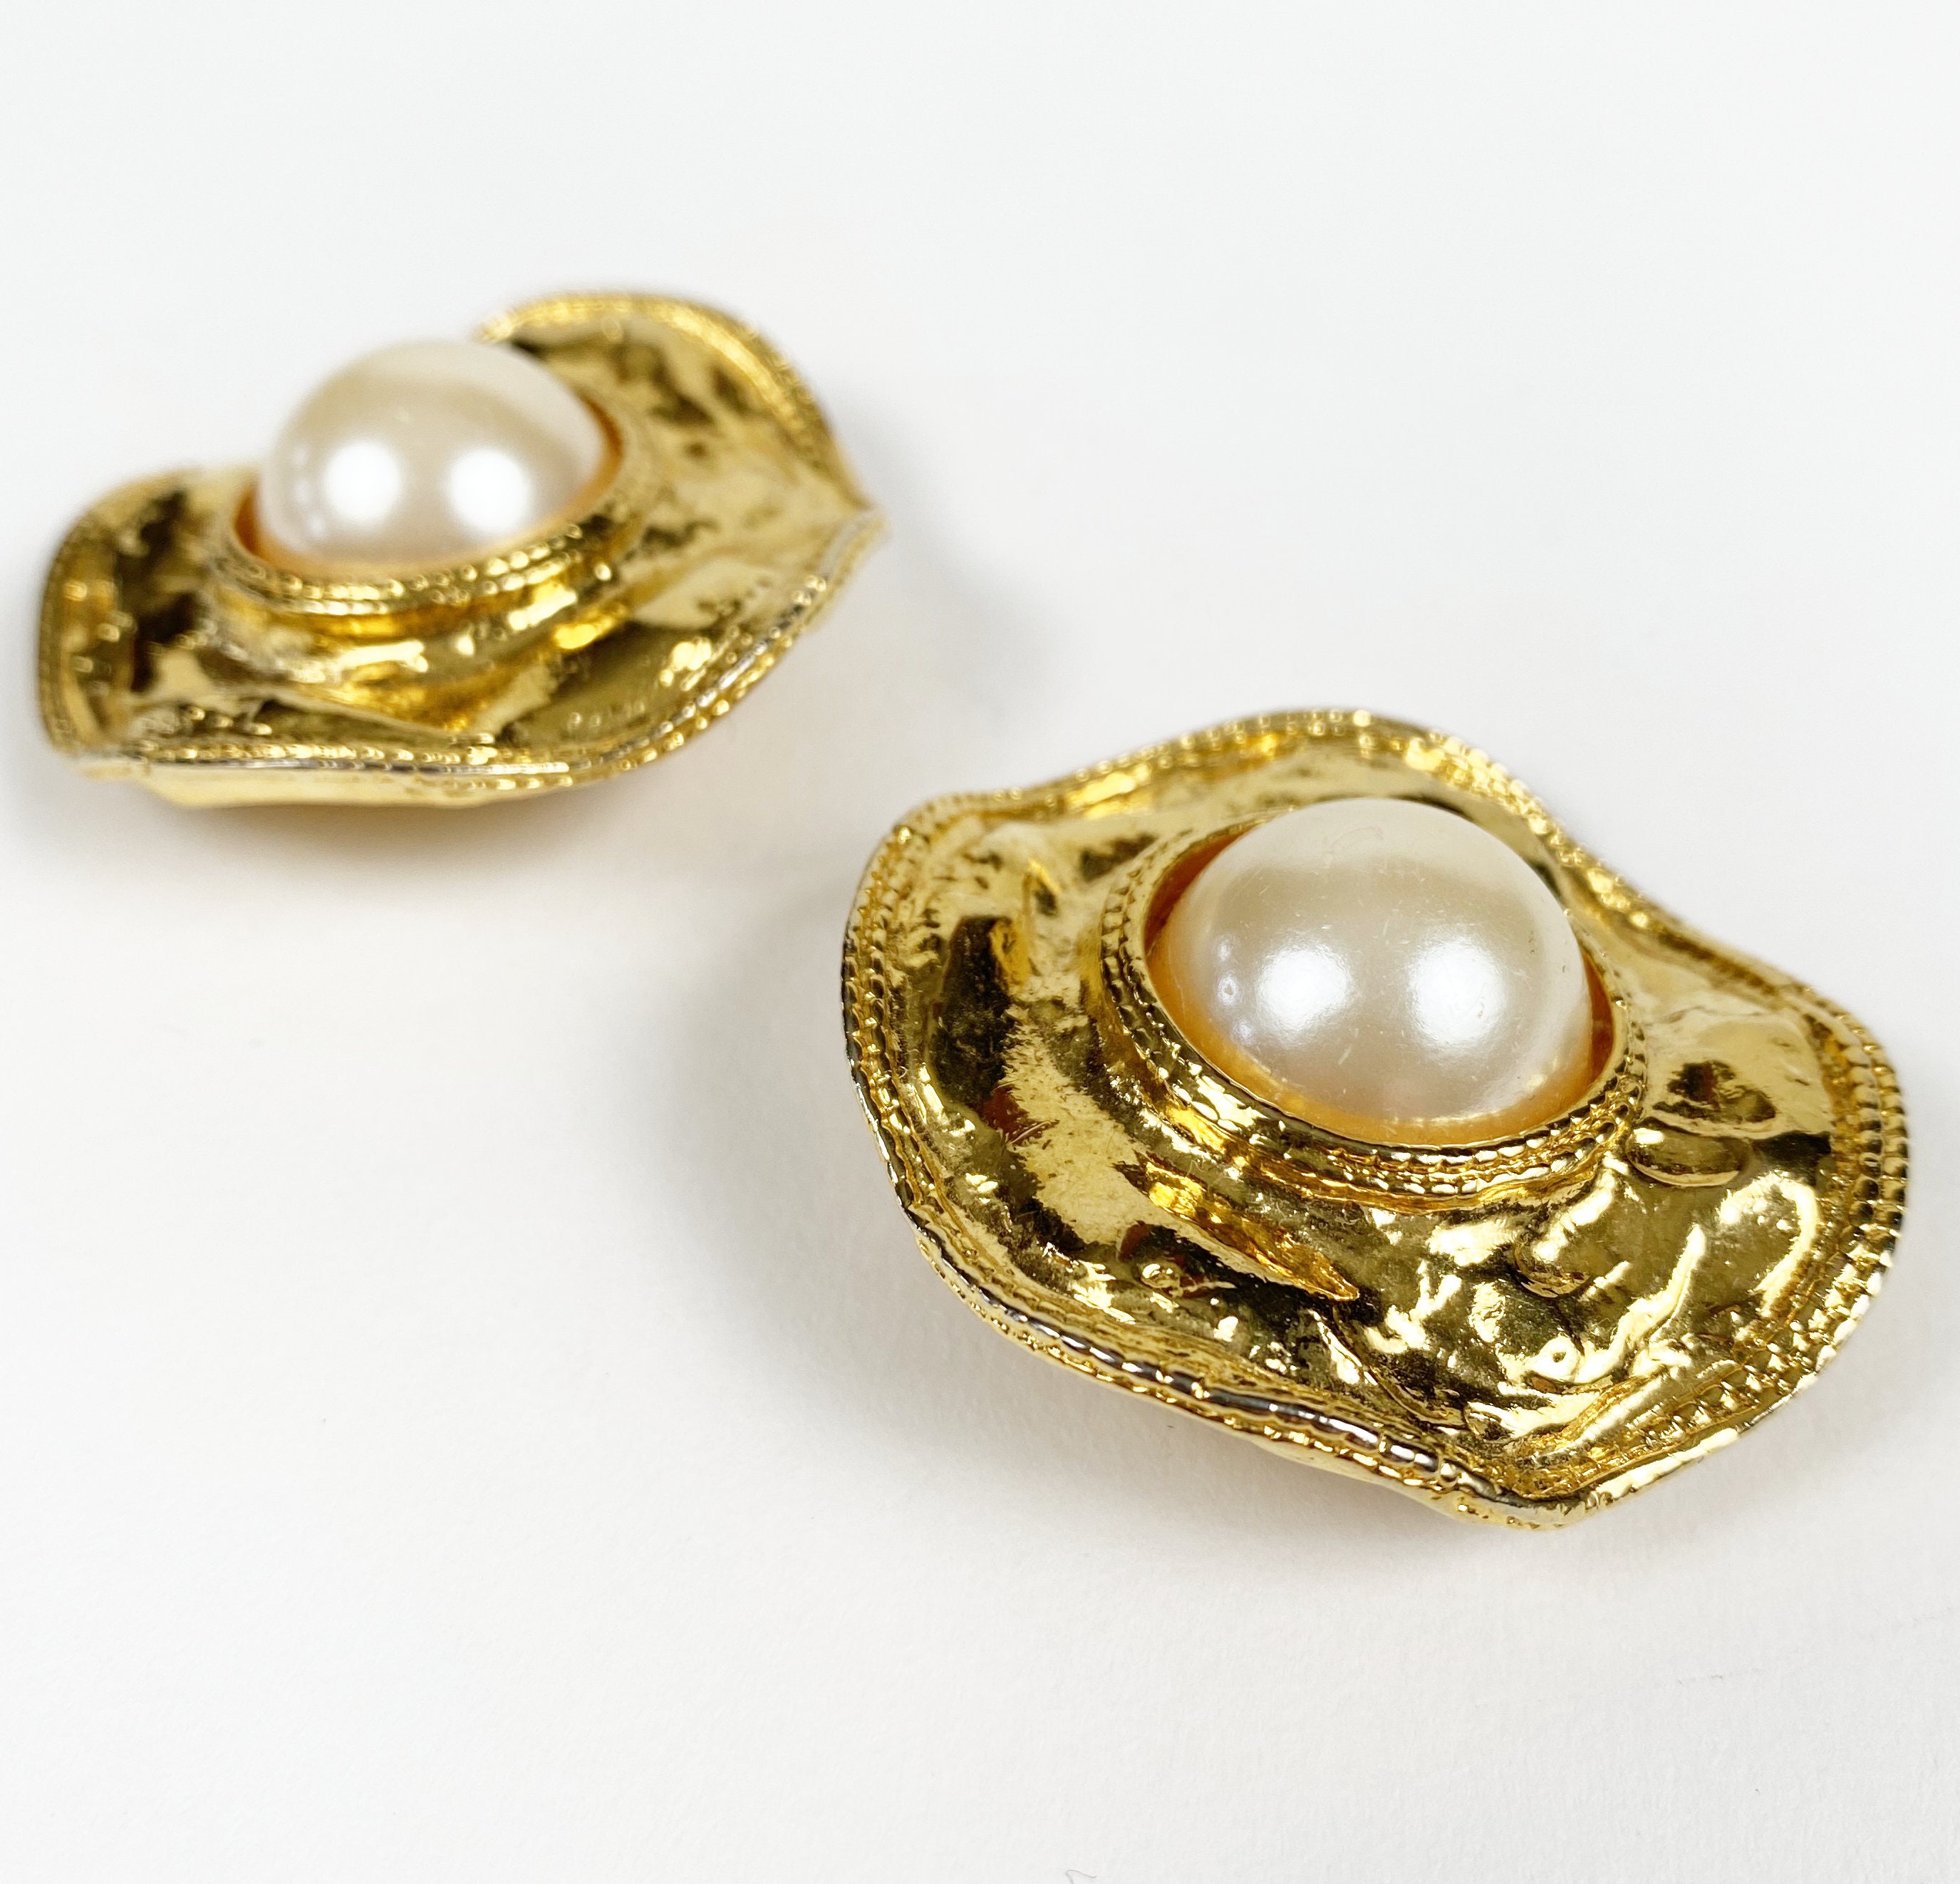 Vintage Gold Satin Finish Faux Pearls-Large - A Grain of Sand